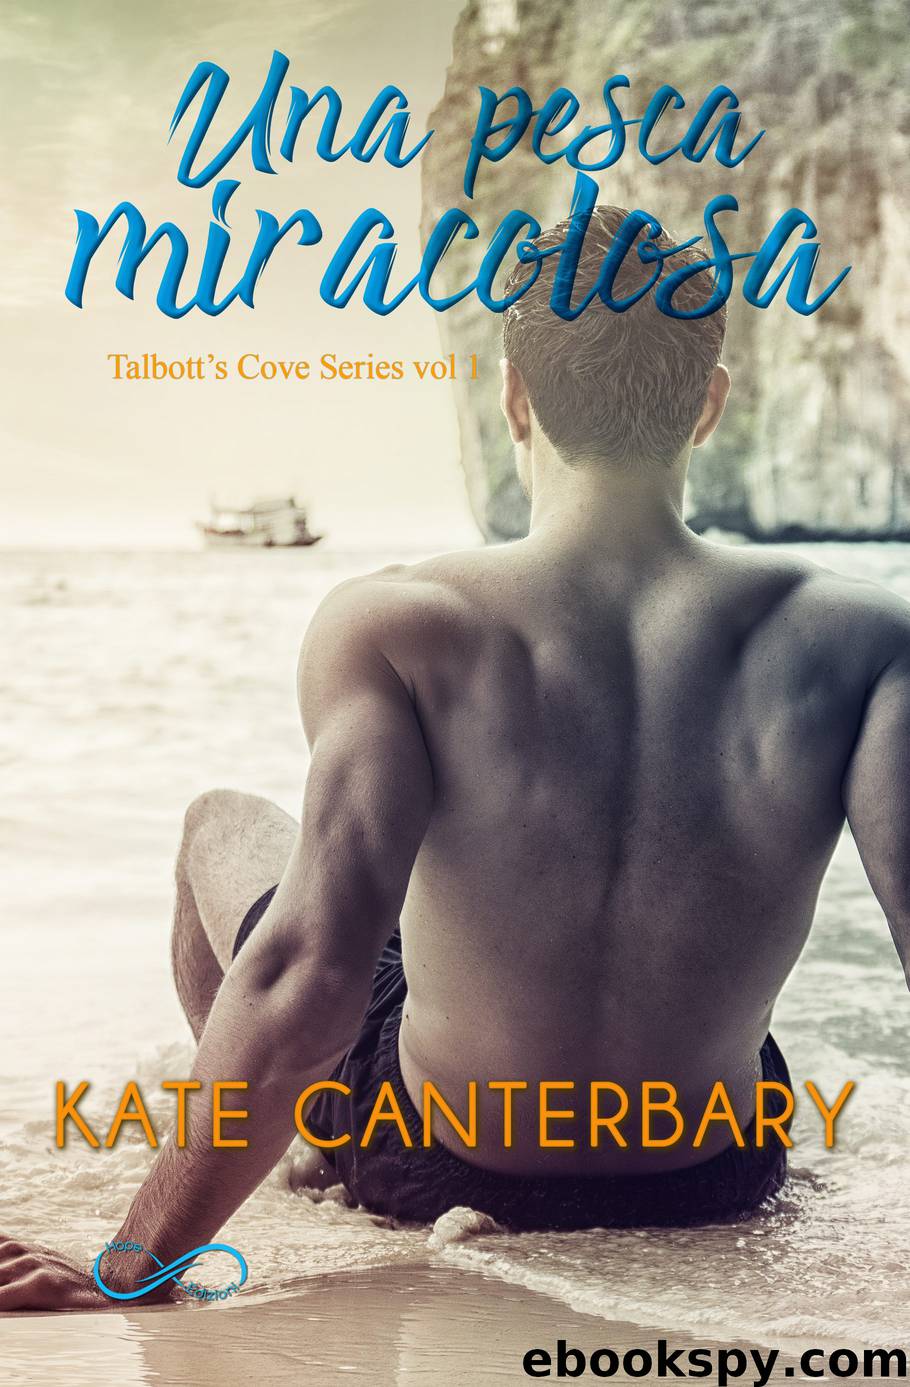 UNA PESCA MIRACOLOSA (Talbott's Cove Series vol 1) by Kate Canterbary